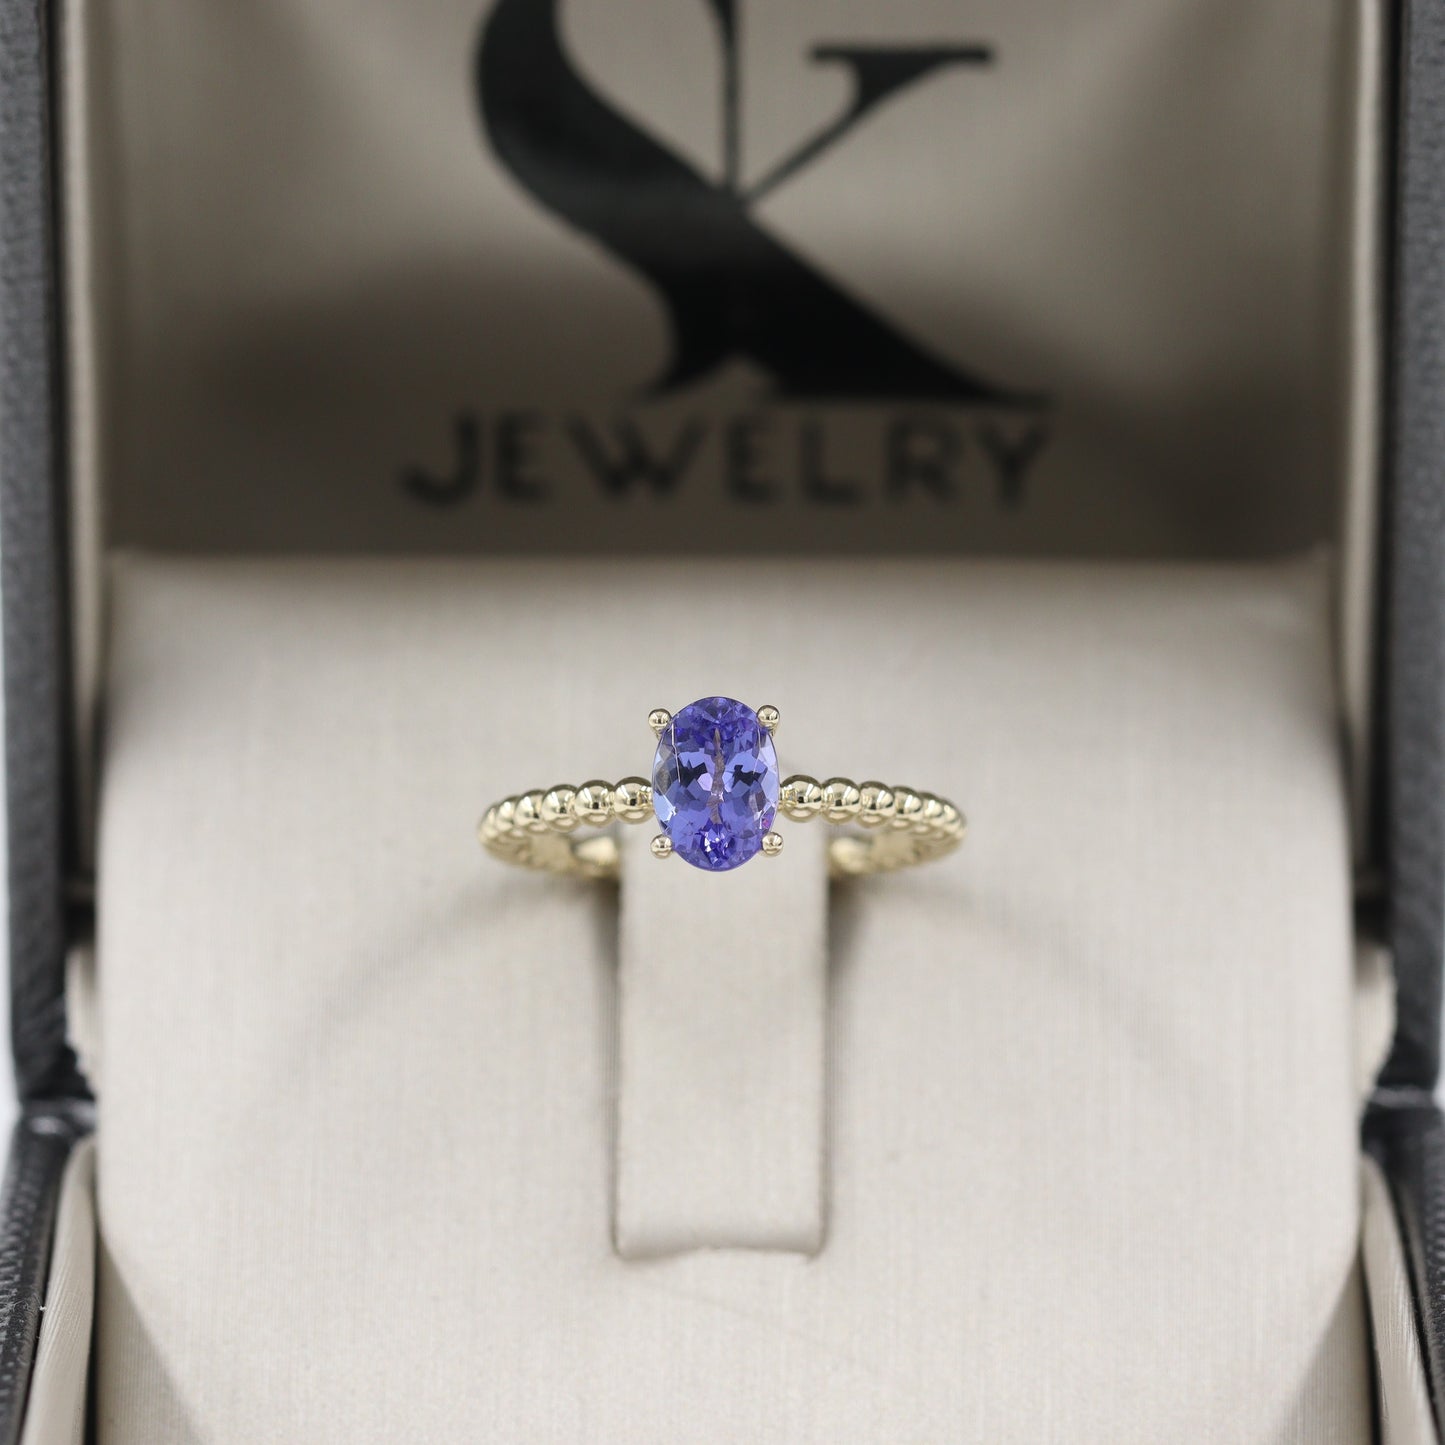 Oval Tanzanite Dainty Silhouette Bead Ring/14k Gold Wedding Ring/Promise Ring/Tanzanite Engagement Ring/Stackable Band/Anniversary Gift